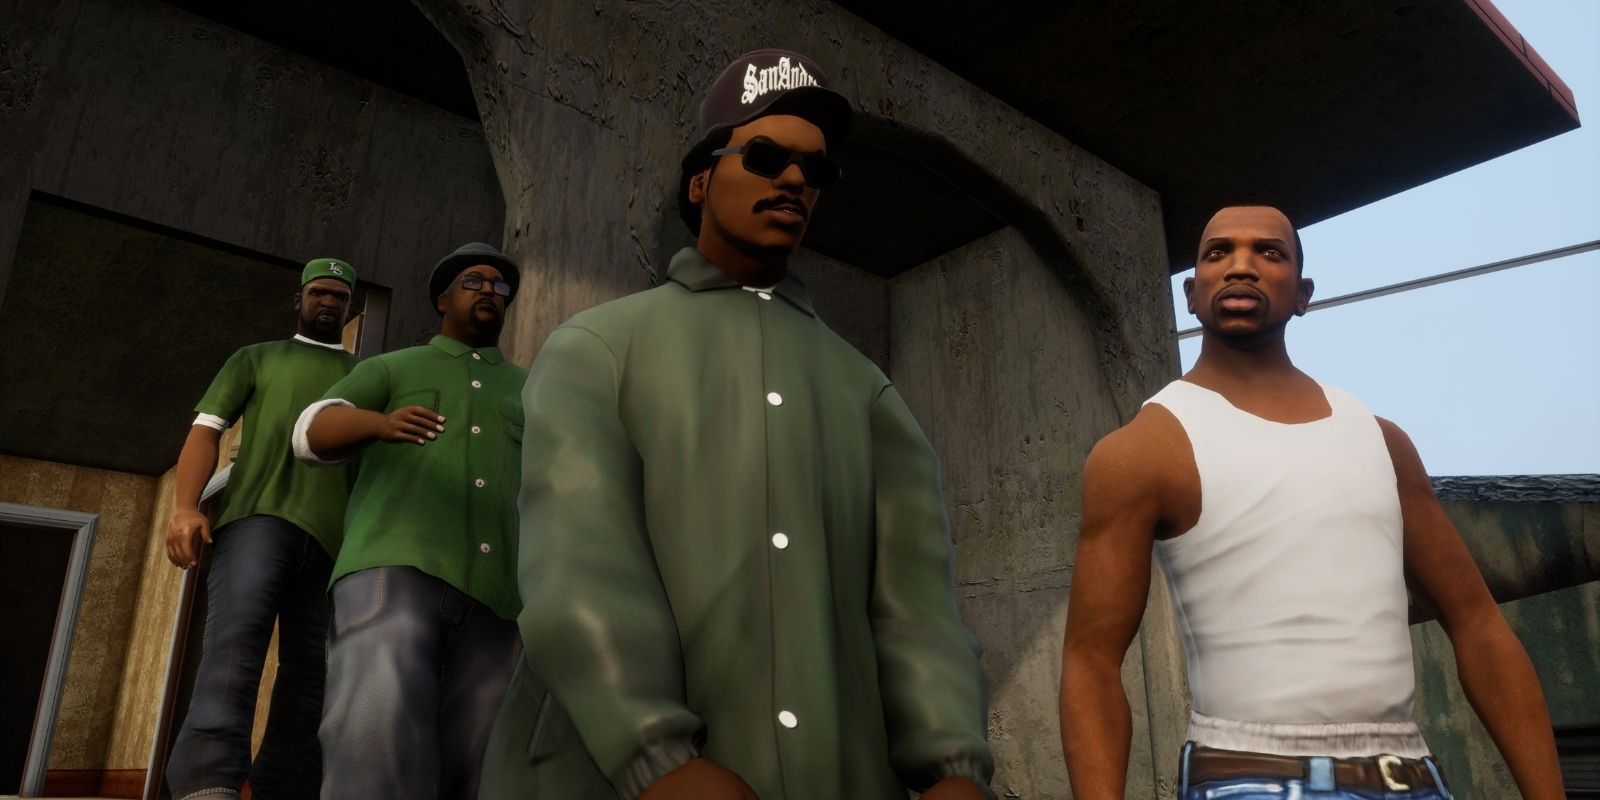 The main cast of characters in Grand Theft Auto: San Andreas